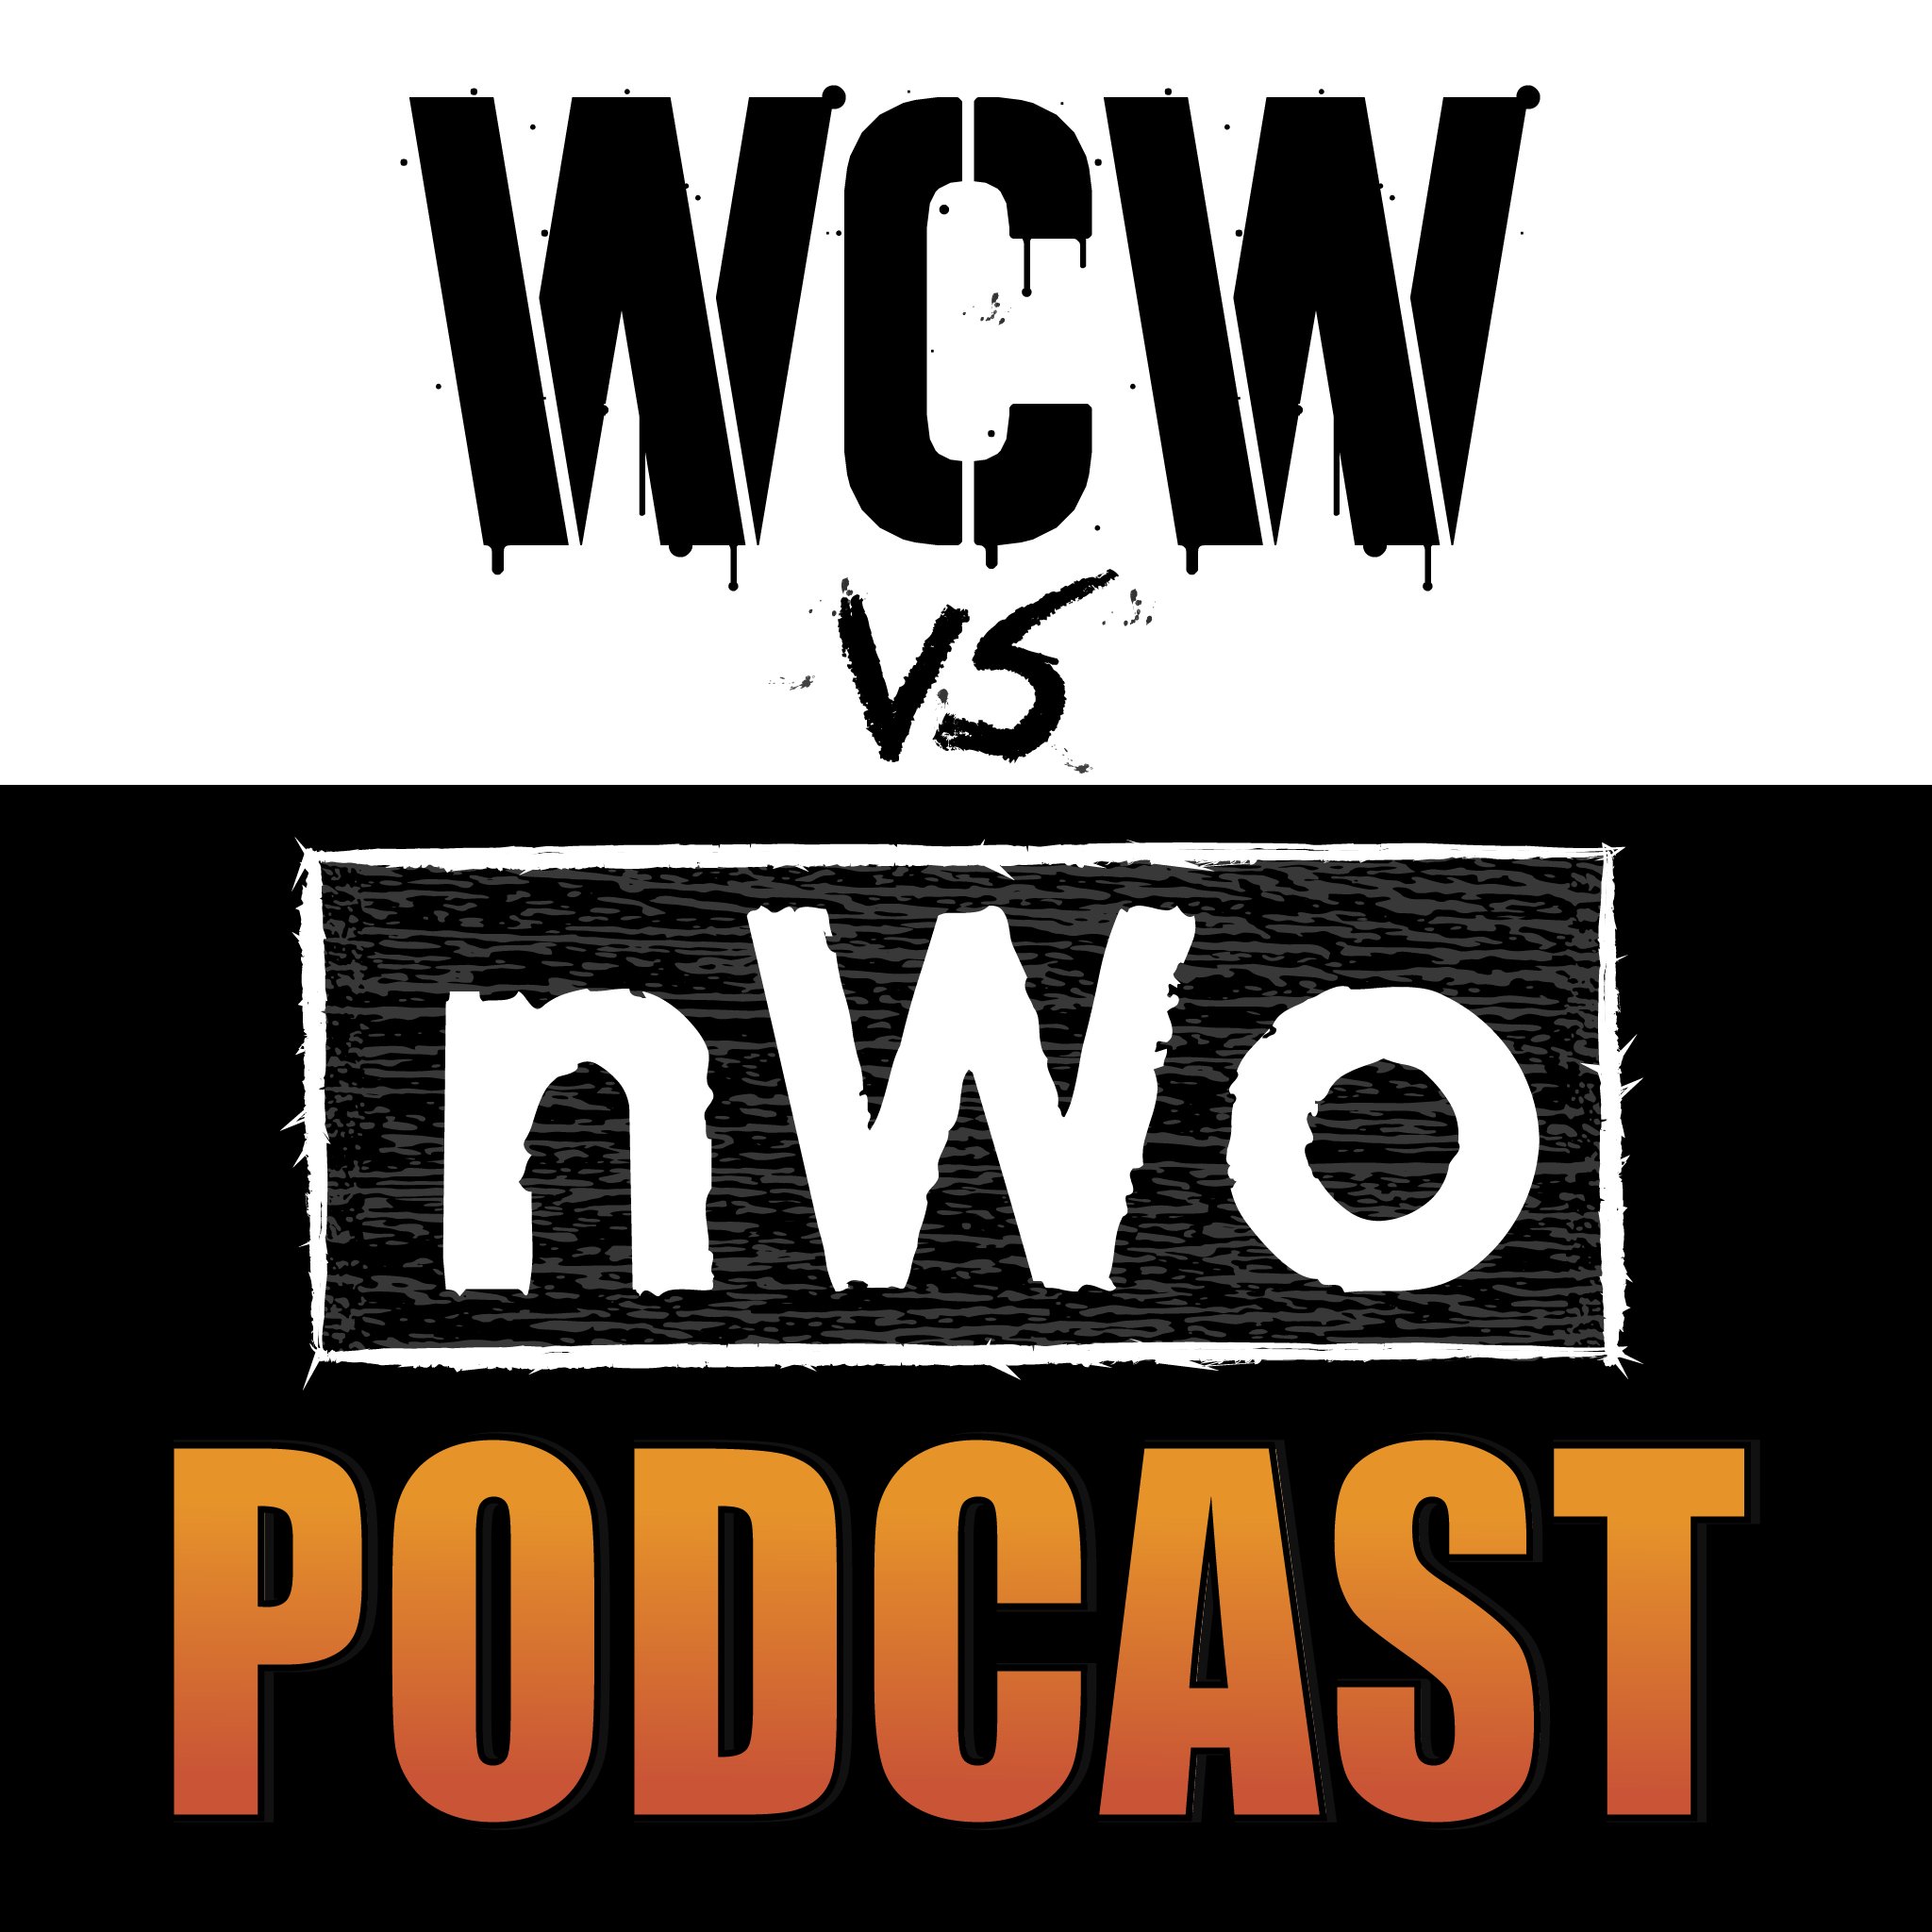 3 wrestling fans review the war between WCW and the NWO PPV by PPV 96-98. Whose side are you on?  Support us at https://t.co/HujG0eevvI